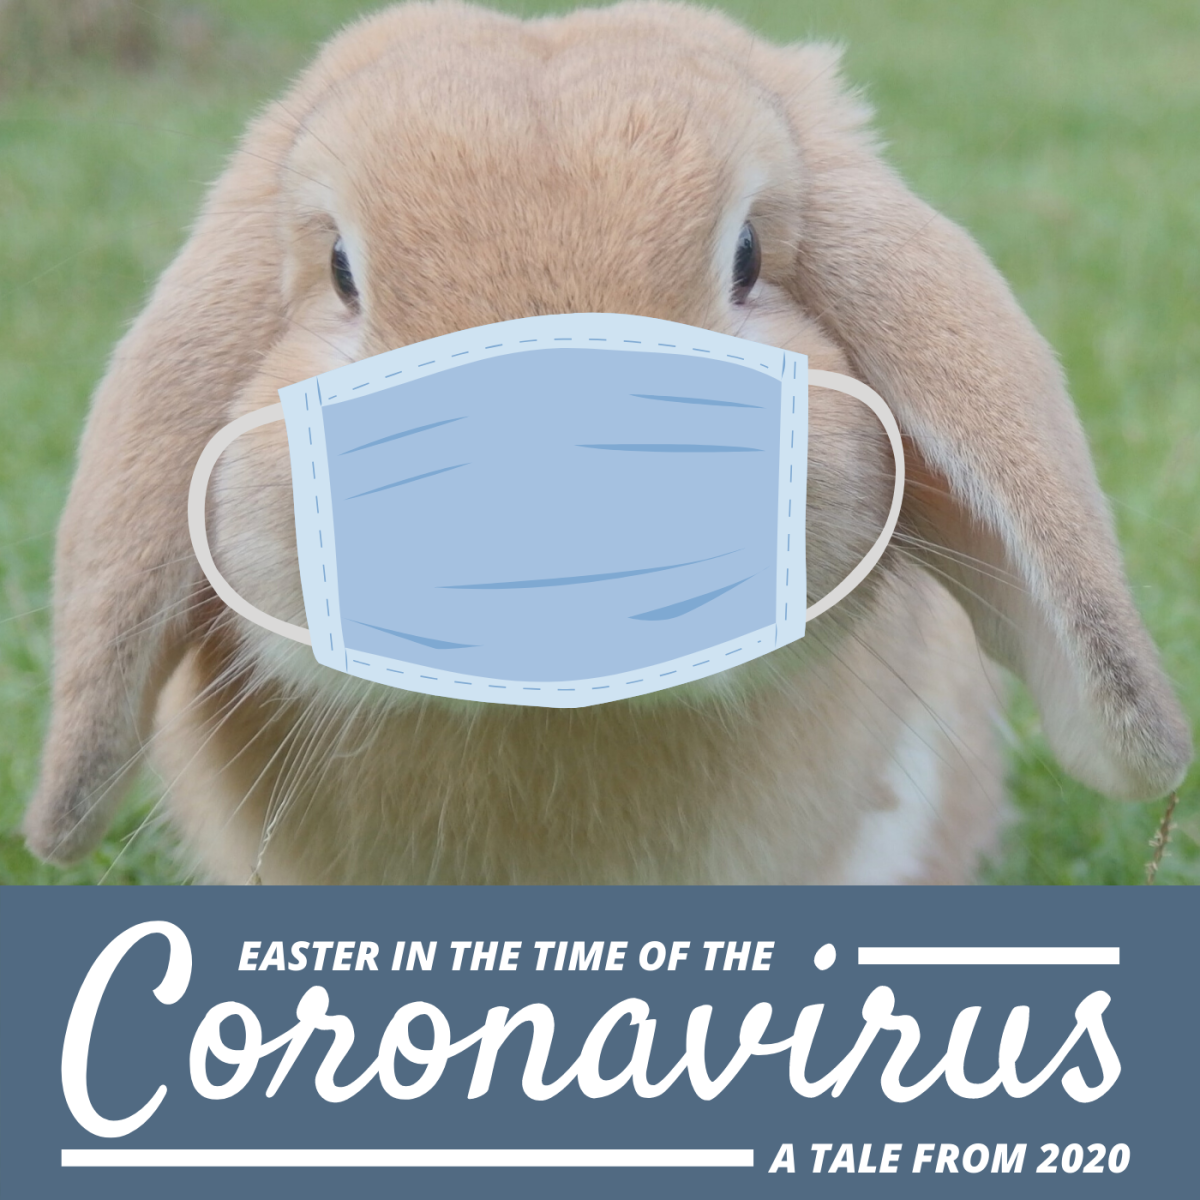 Easter During the Coronavirus: A Tale from 2020 - HubPages